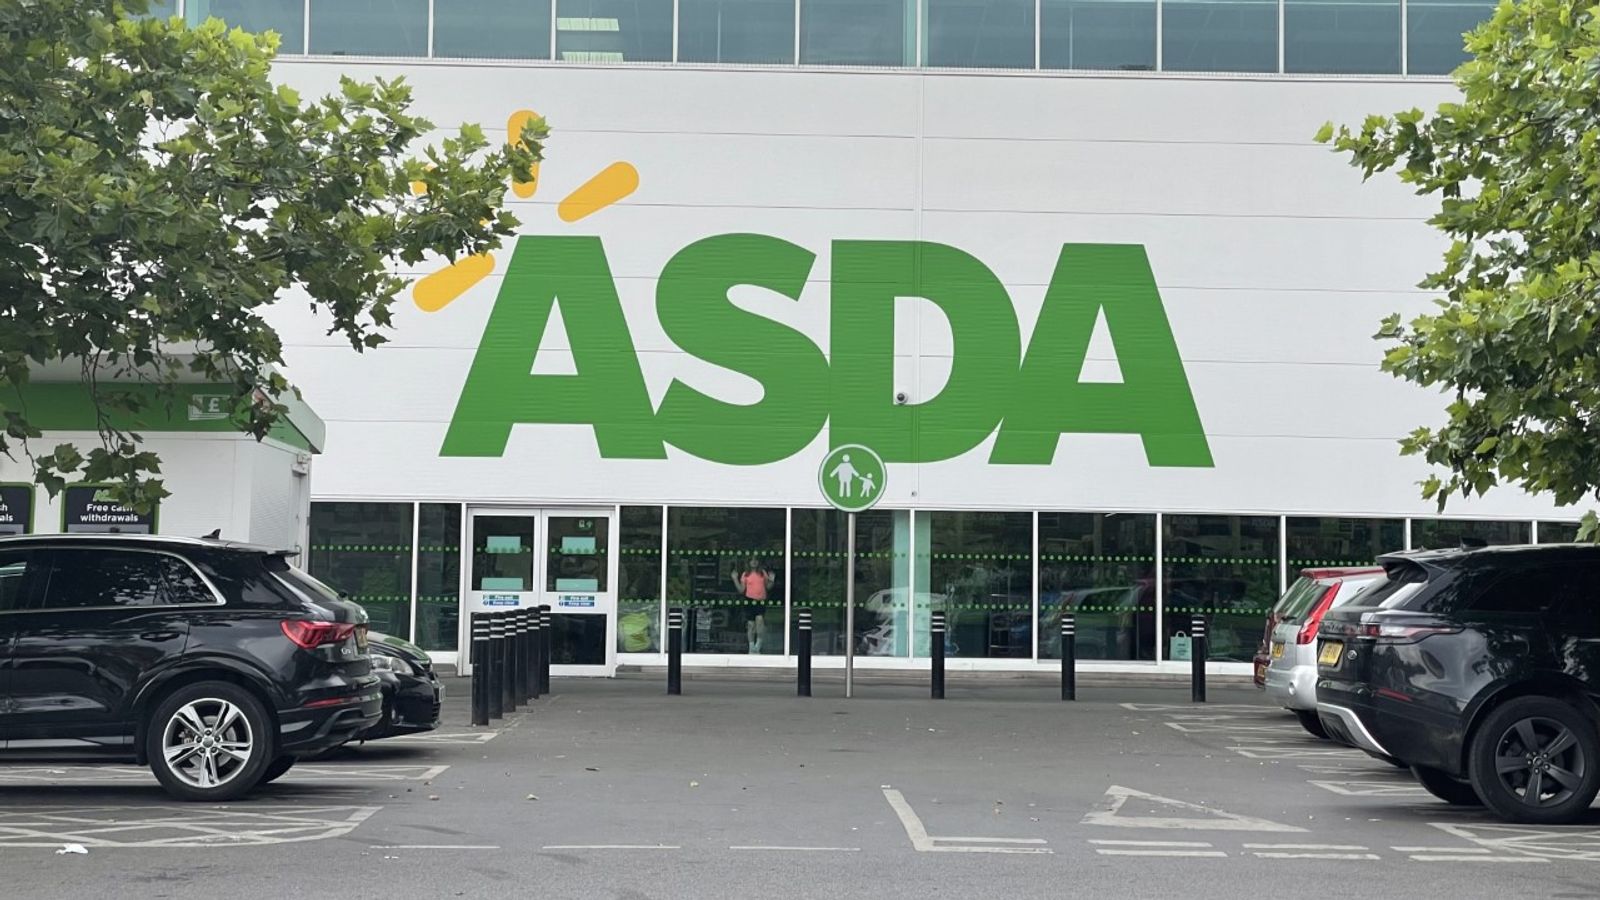 7,000 Asda staff could face the sack unless they agree to a 'shameful' pay cut, union claims